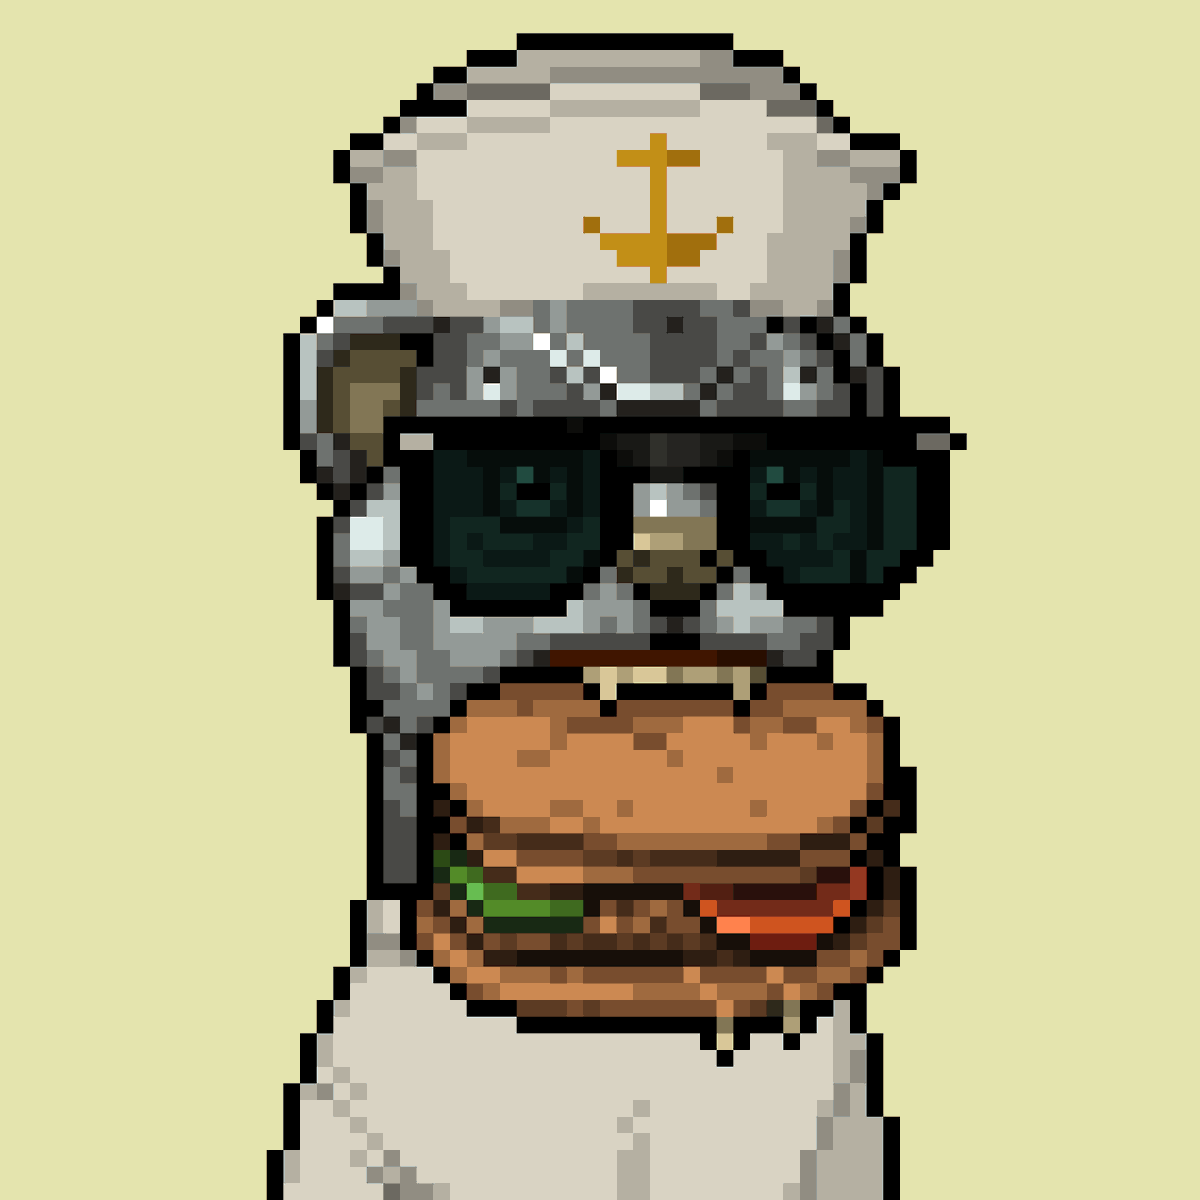 🍔🍔Happy #NationalBurgerDay to everyone!🍔🍔

Especially to our beloved #MongArmy!

$MONG